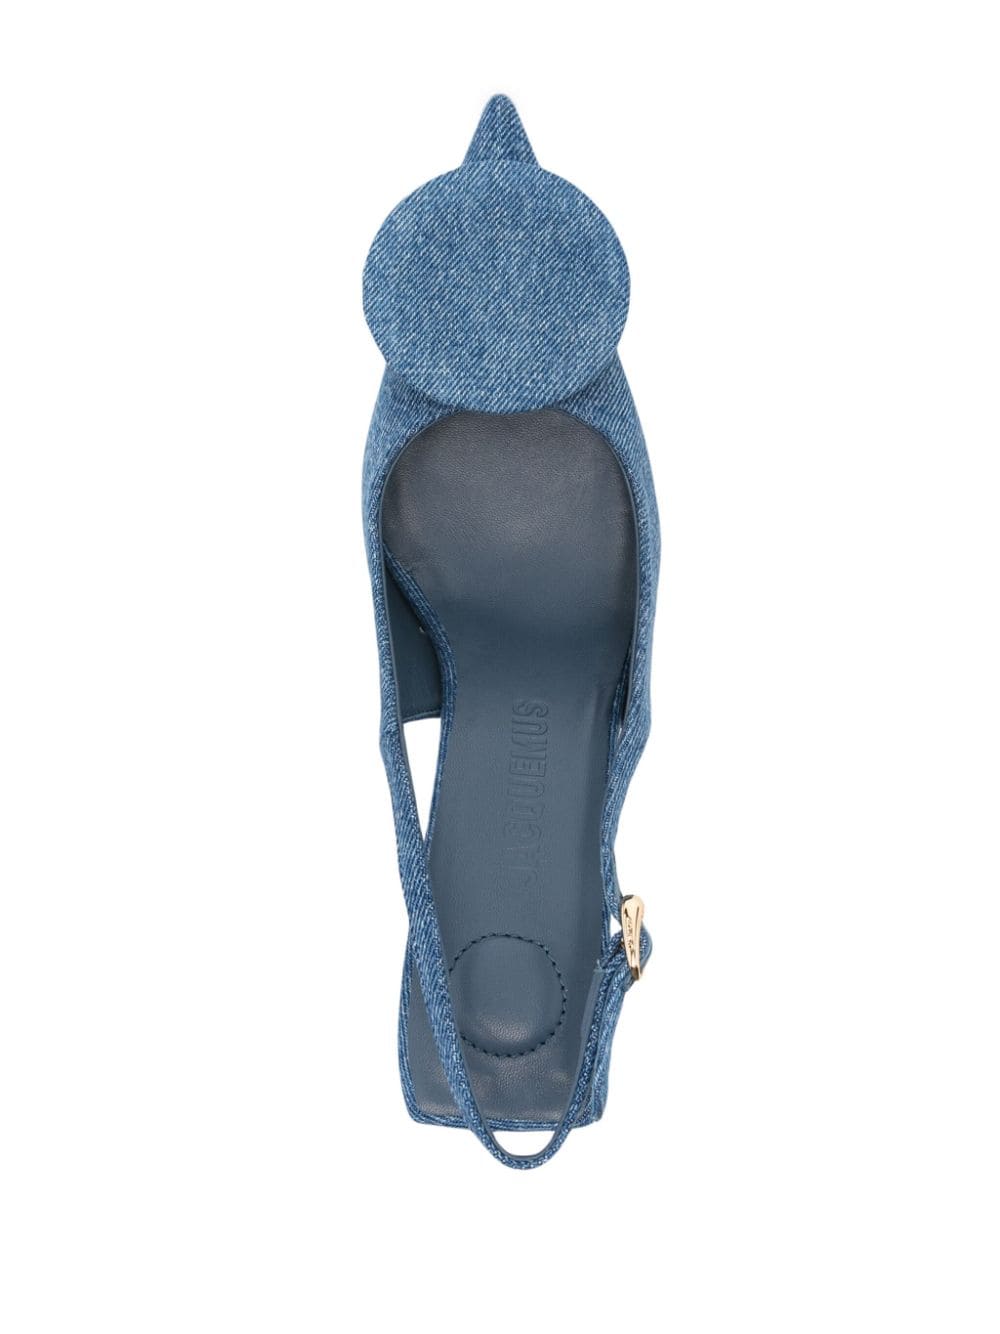 Blue Cotton and Leather Twill Weave Slingbacks for Women